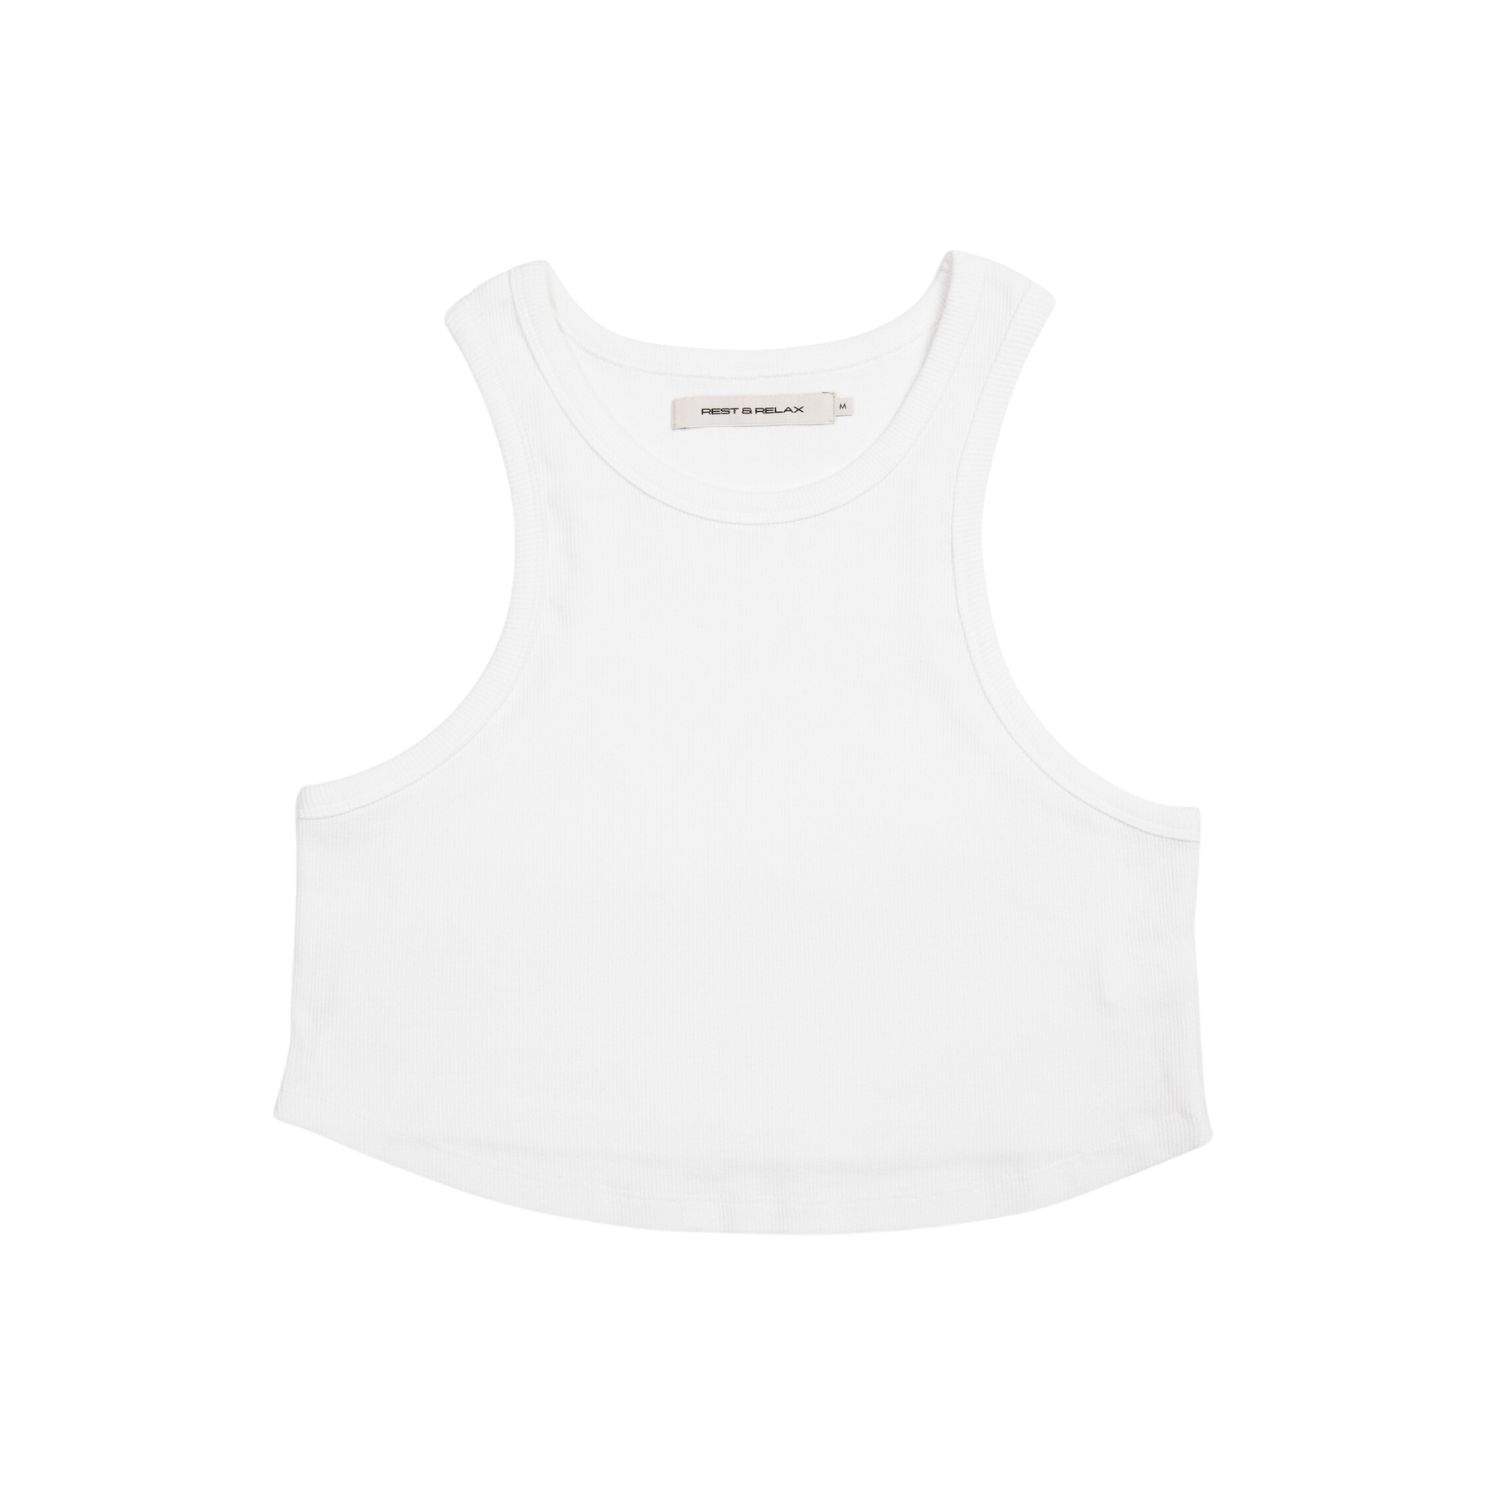 Women’s Organic Cotton Cropped Tank - White Extra Small Rest & Relax